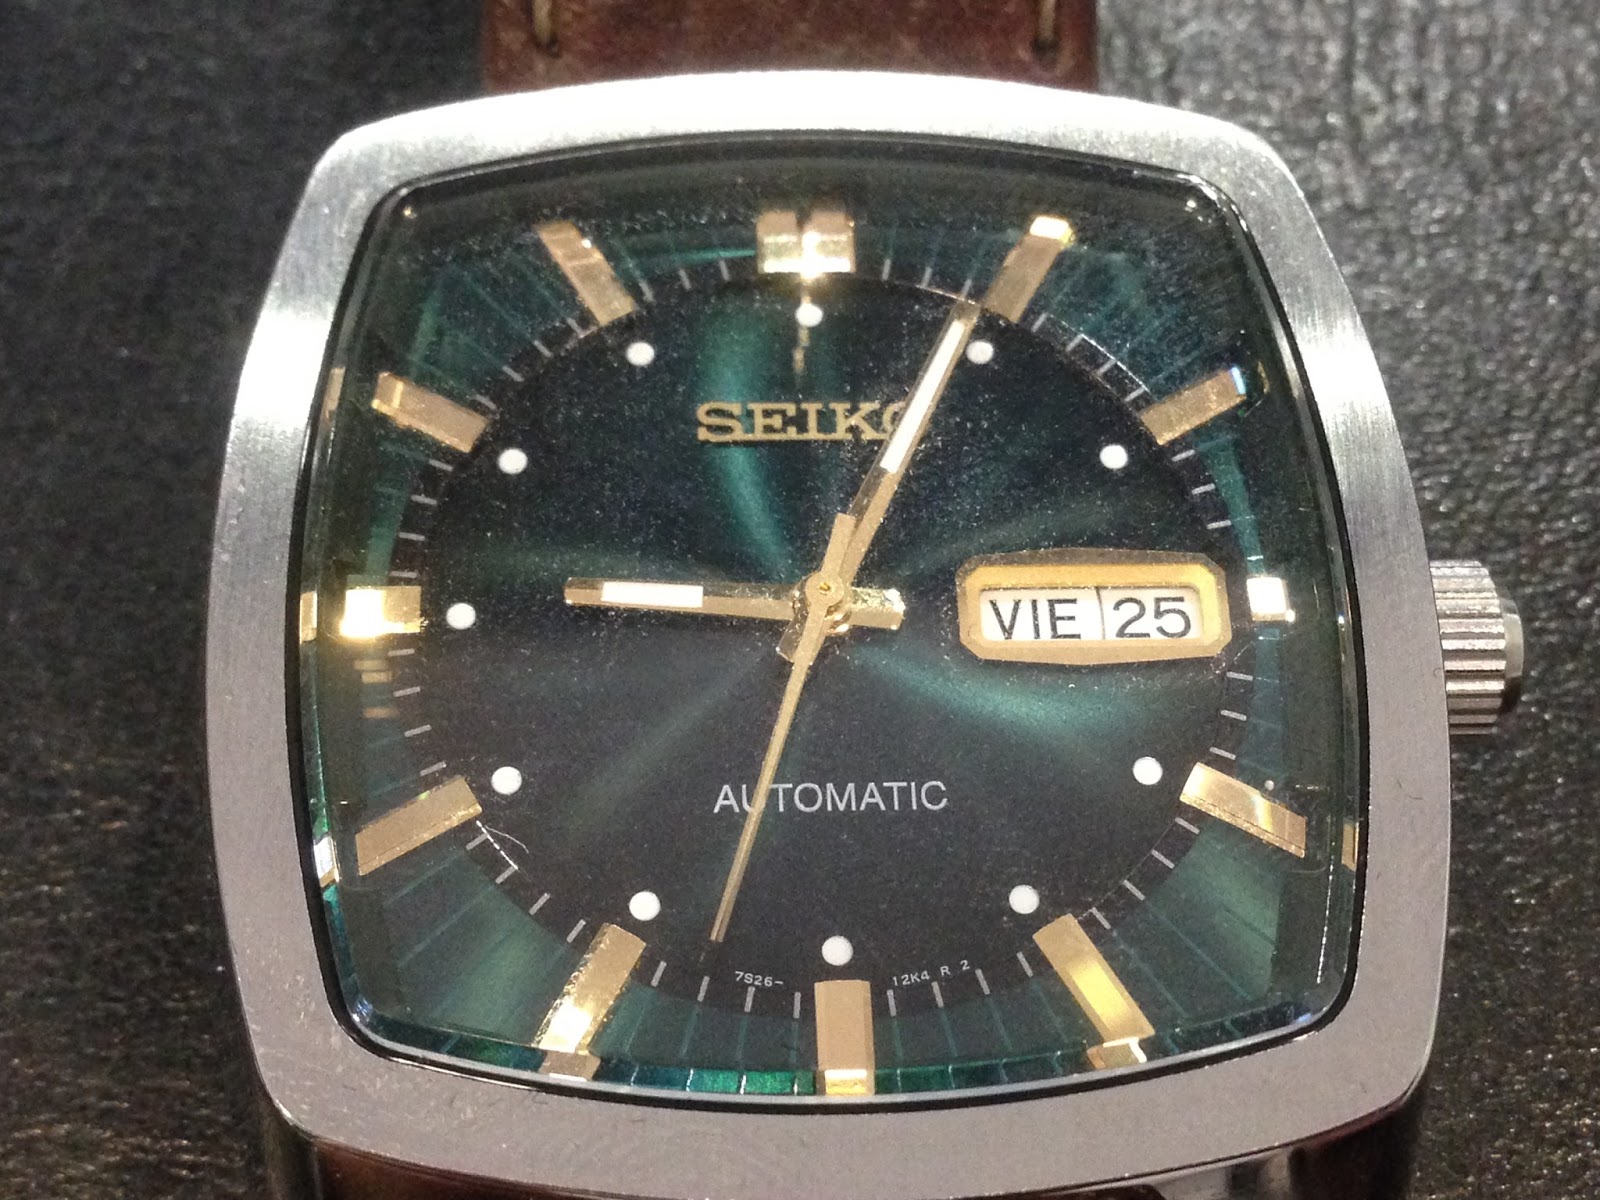 My Eastern Watch Collection: Seiko Recraft Series Automatic Green Watch  SNKP27 (Similar to SNKP23, SNKP25) - Welcome Home Beautiful, A Review (plus  Video)